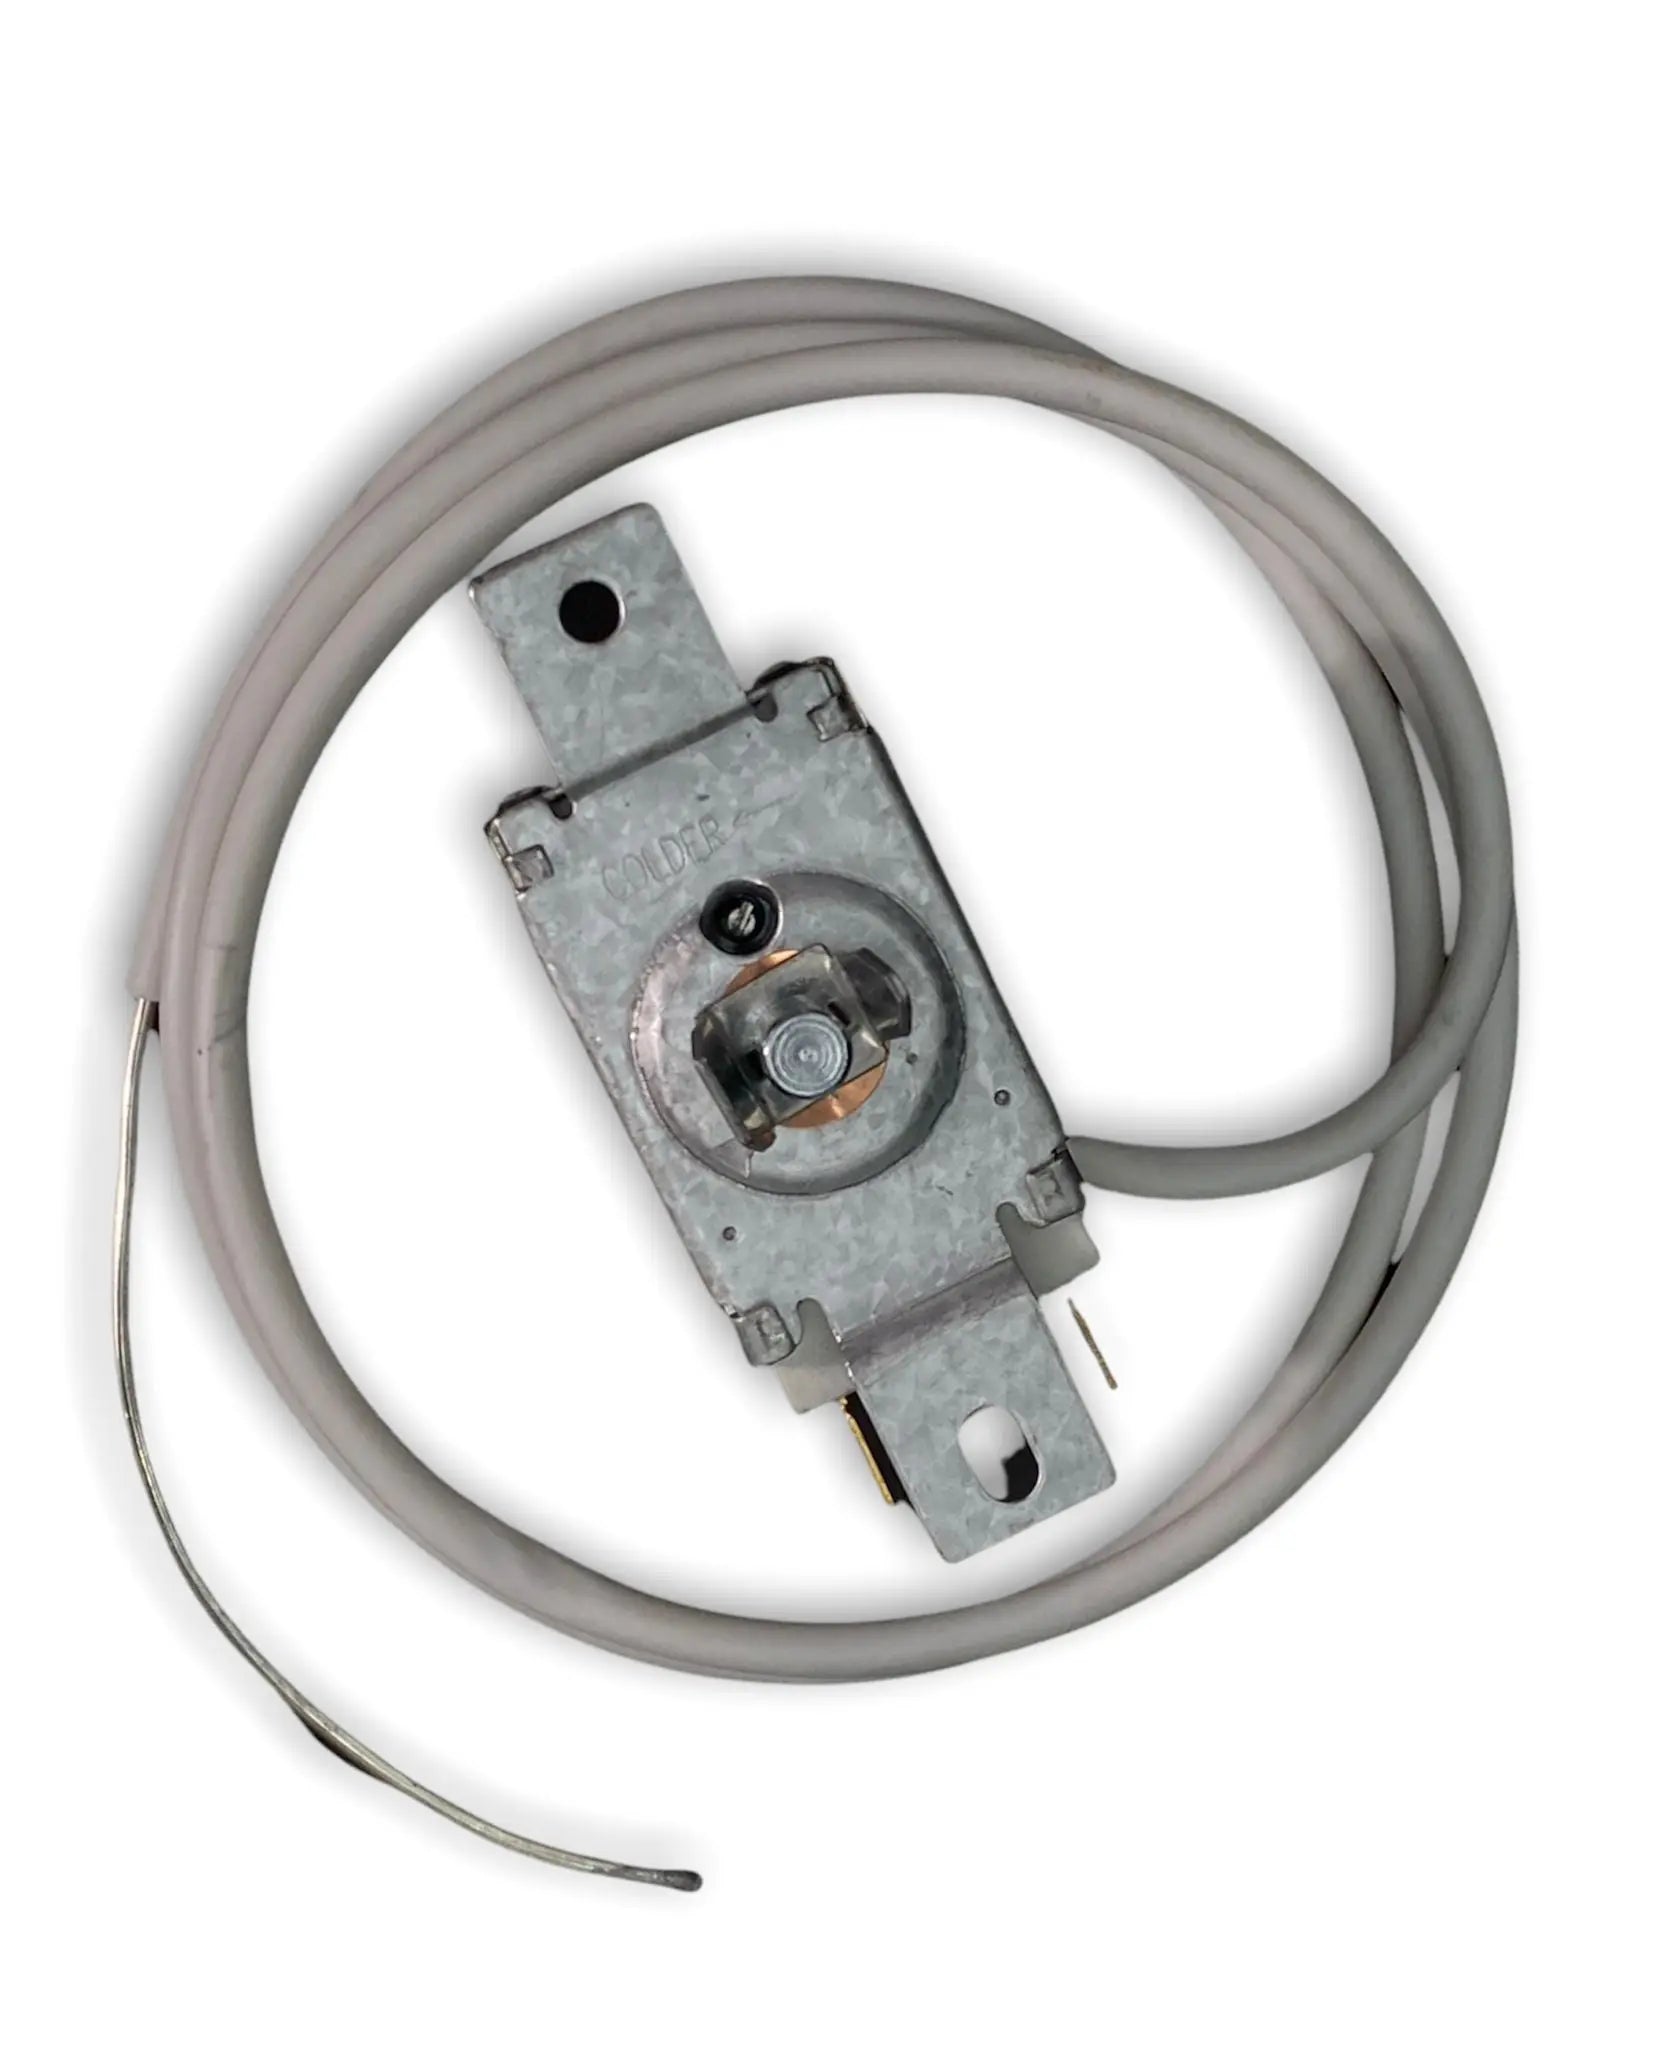 2198202 Refrigerator Thermostat Replacement for Whirlpool / Roper / Amana >  Speedy Appliance Parts